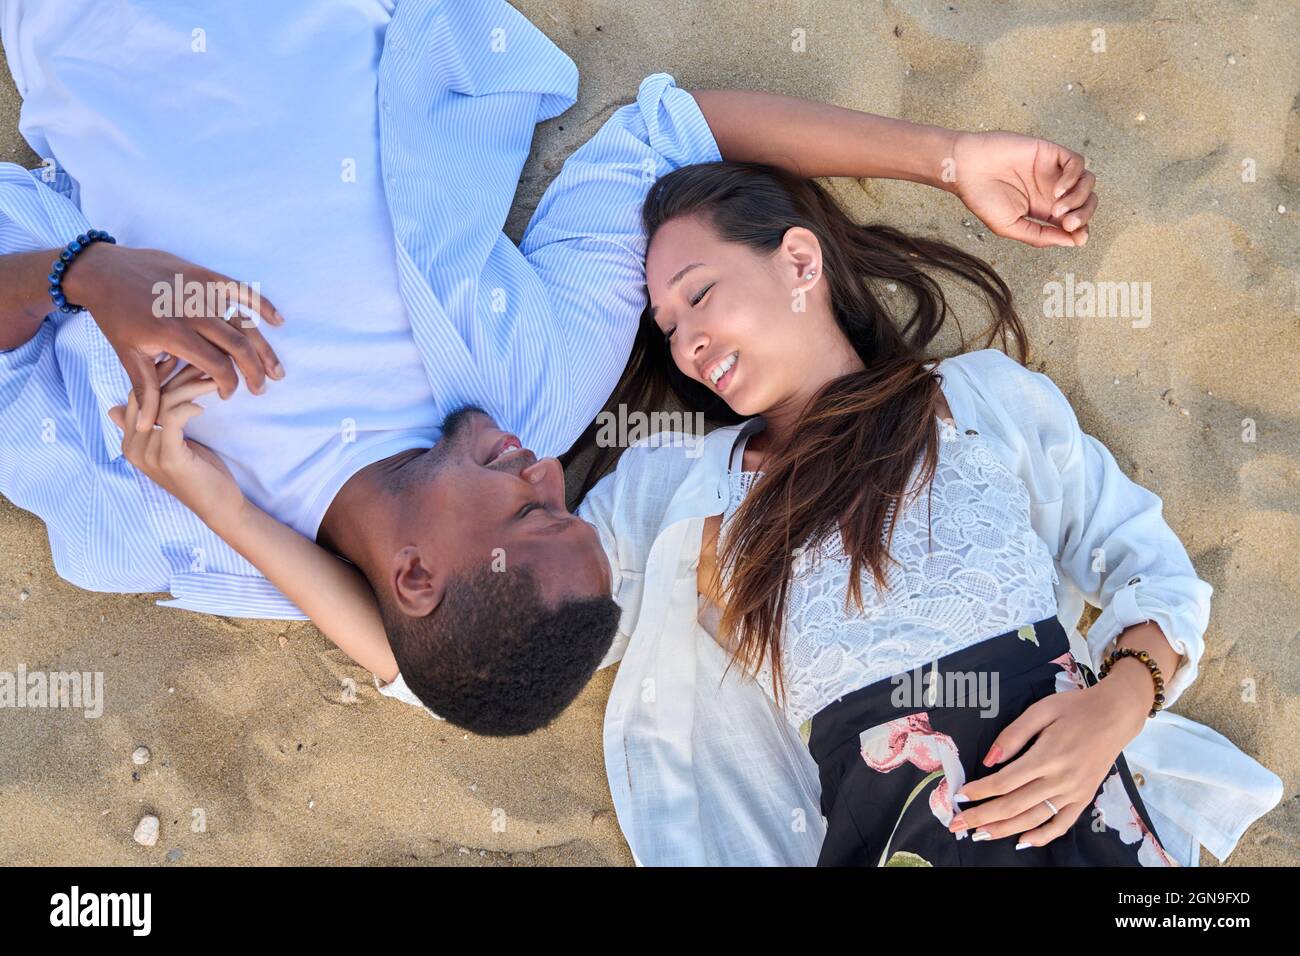 Top view of a young couple in love on the sand Stock Photo